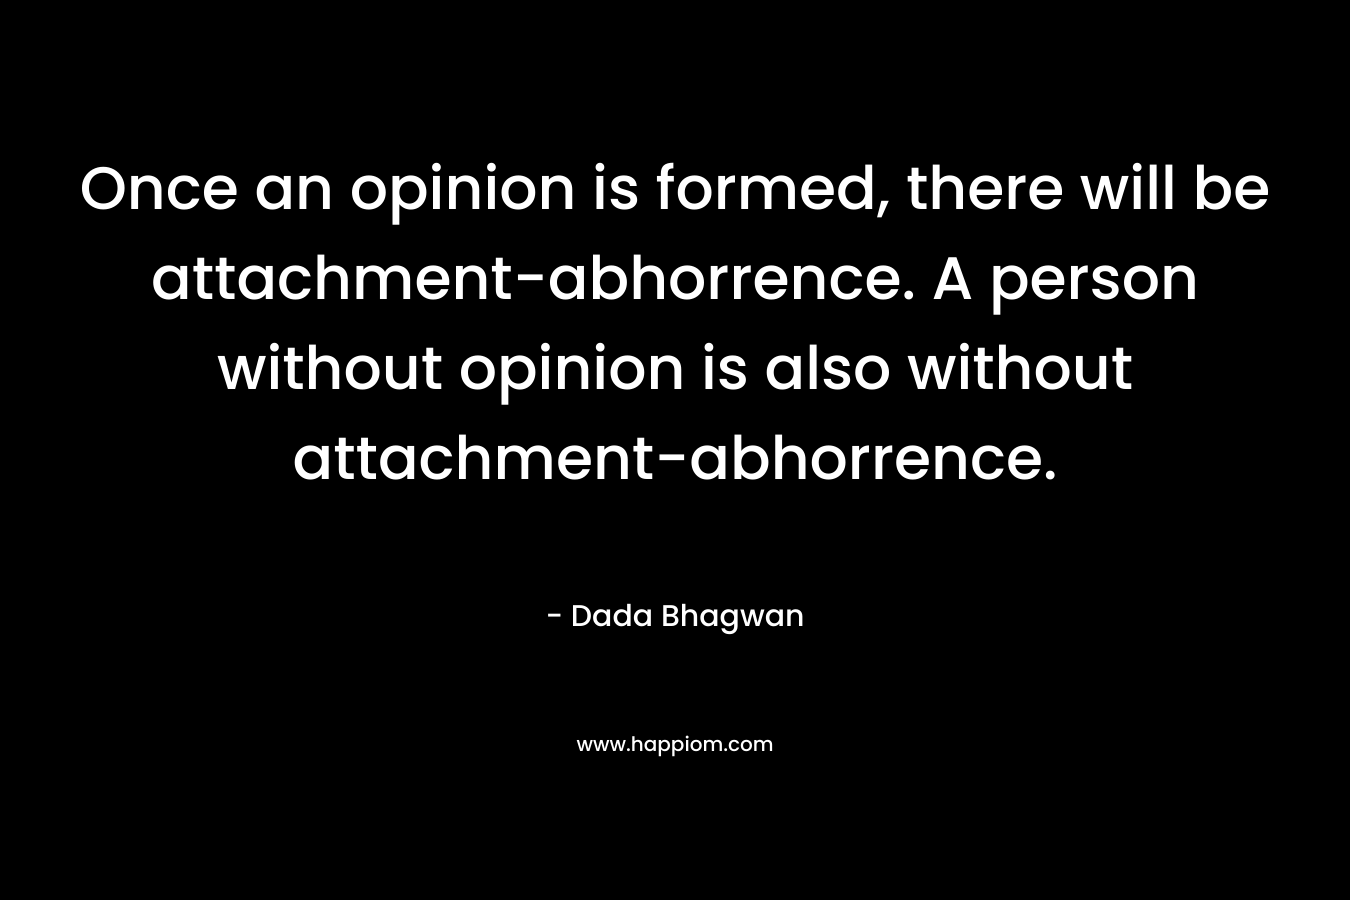 Once an opinion is formed, there will be attachment-abhorrence. A person without opinion is also without attachment-abhorrence.